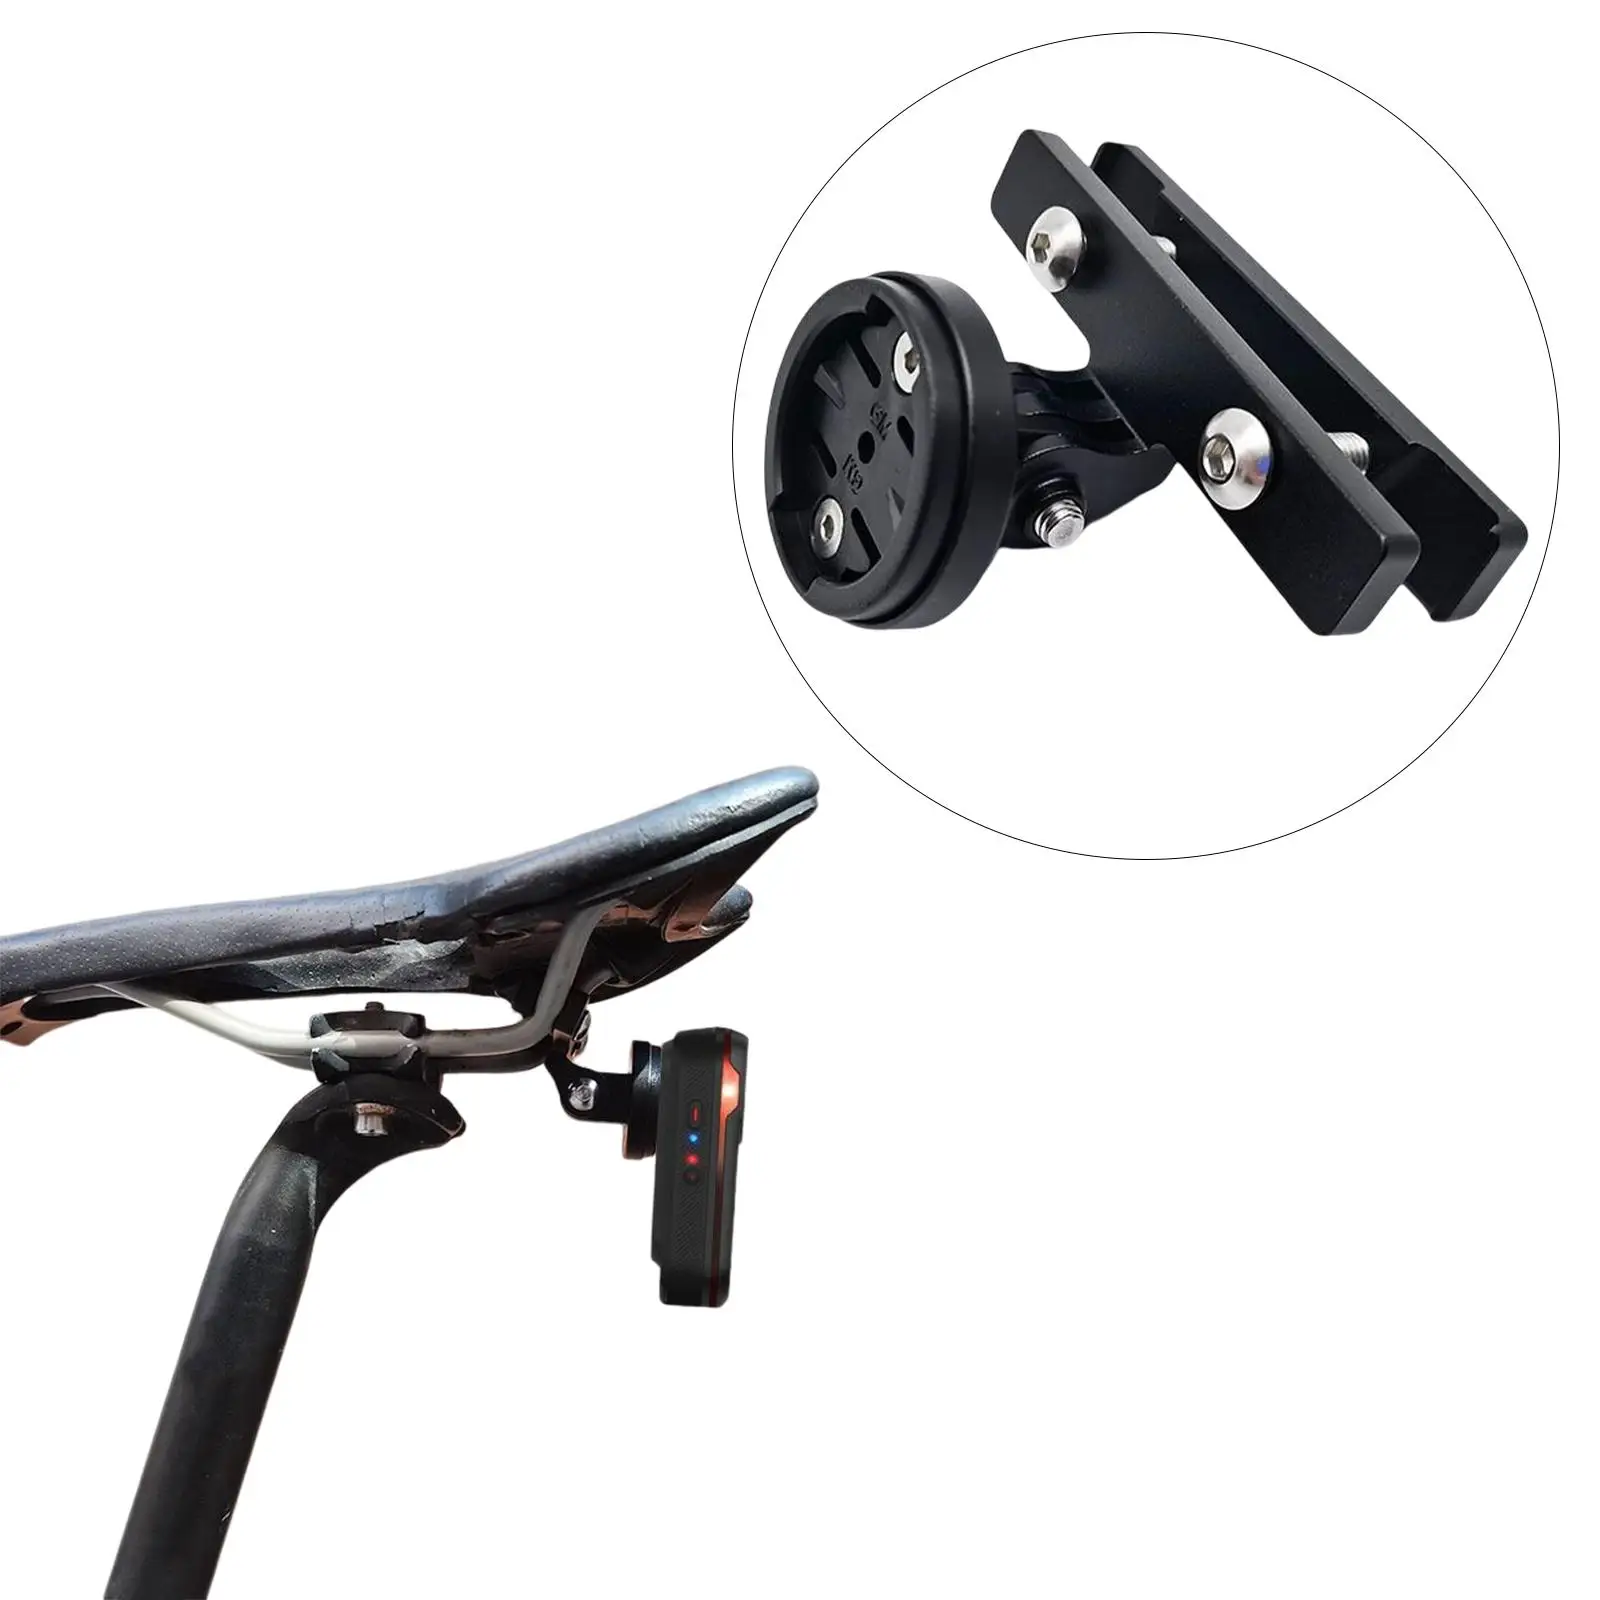 Universal bike Bracket Seatpost Mount Taillight Mounting Cycling Accessories Rack bike Saddle Support for